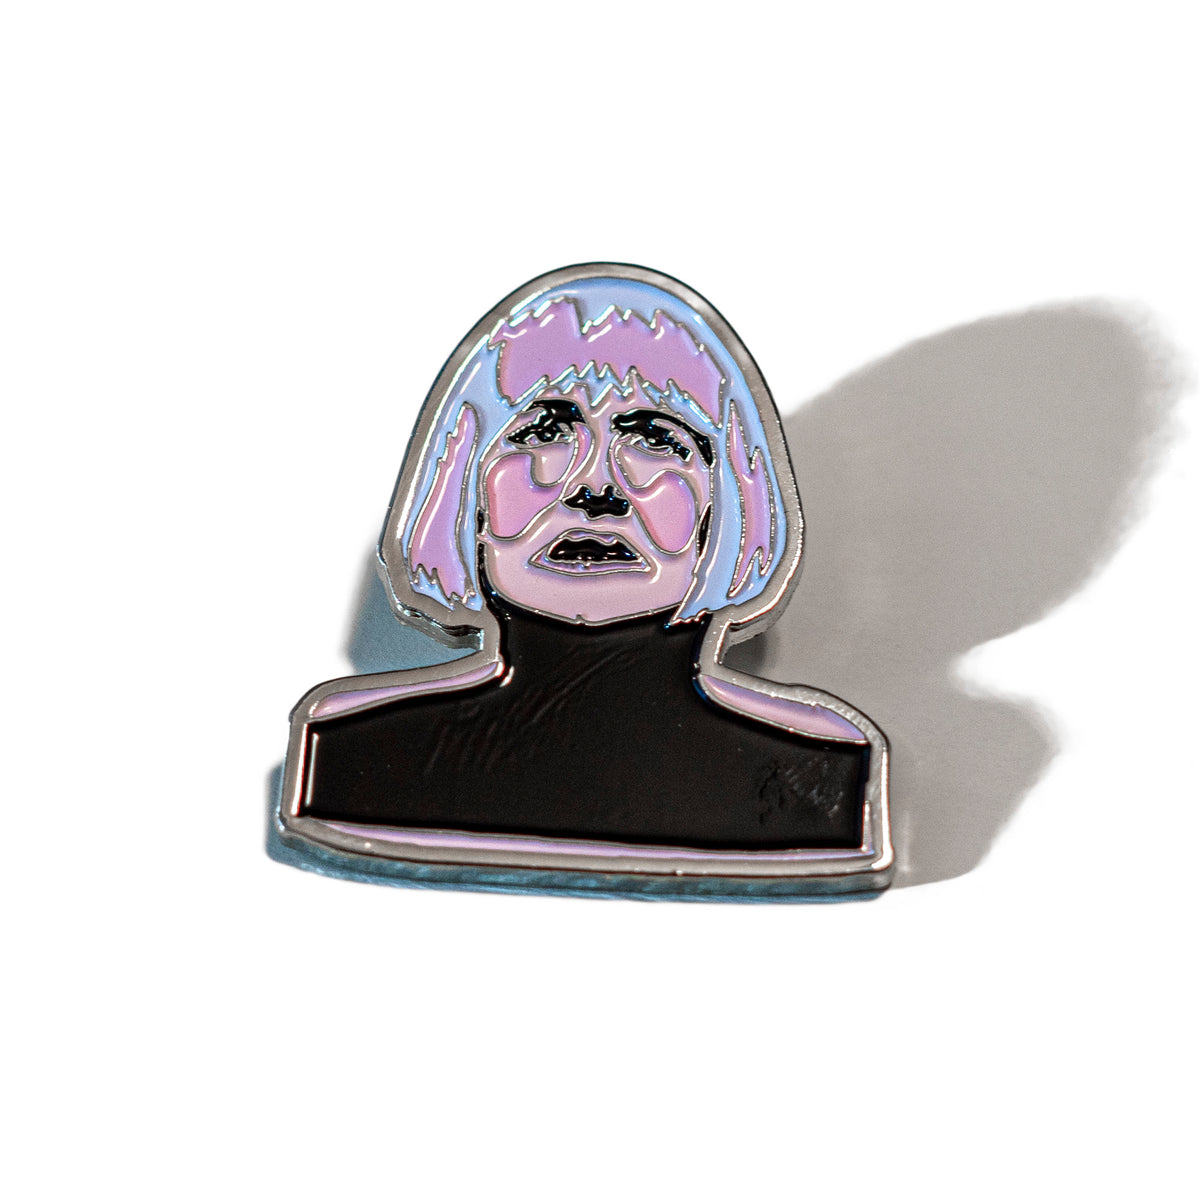 &quot;Diane&quot; from Twin Peaks - Lapel Pin